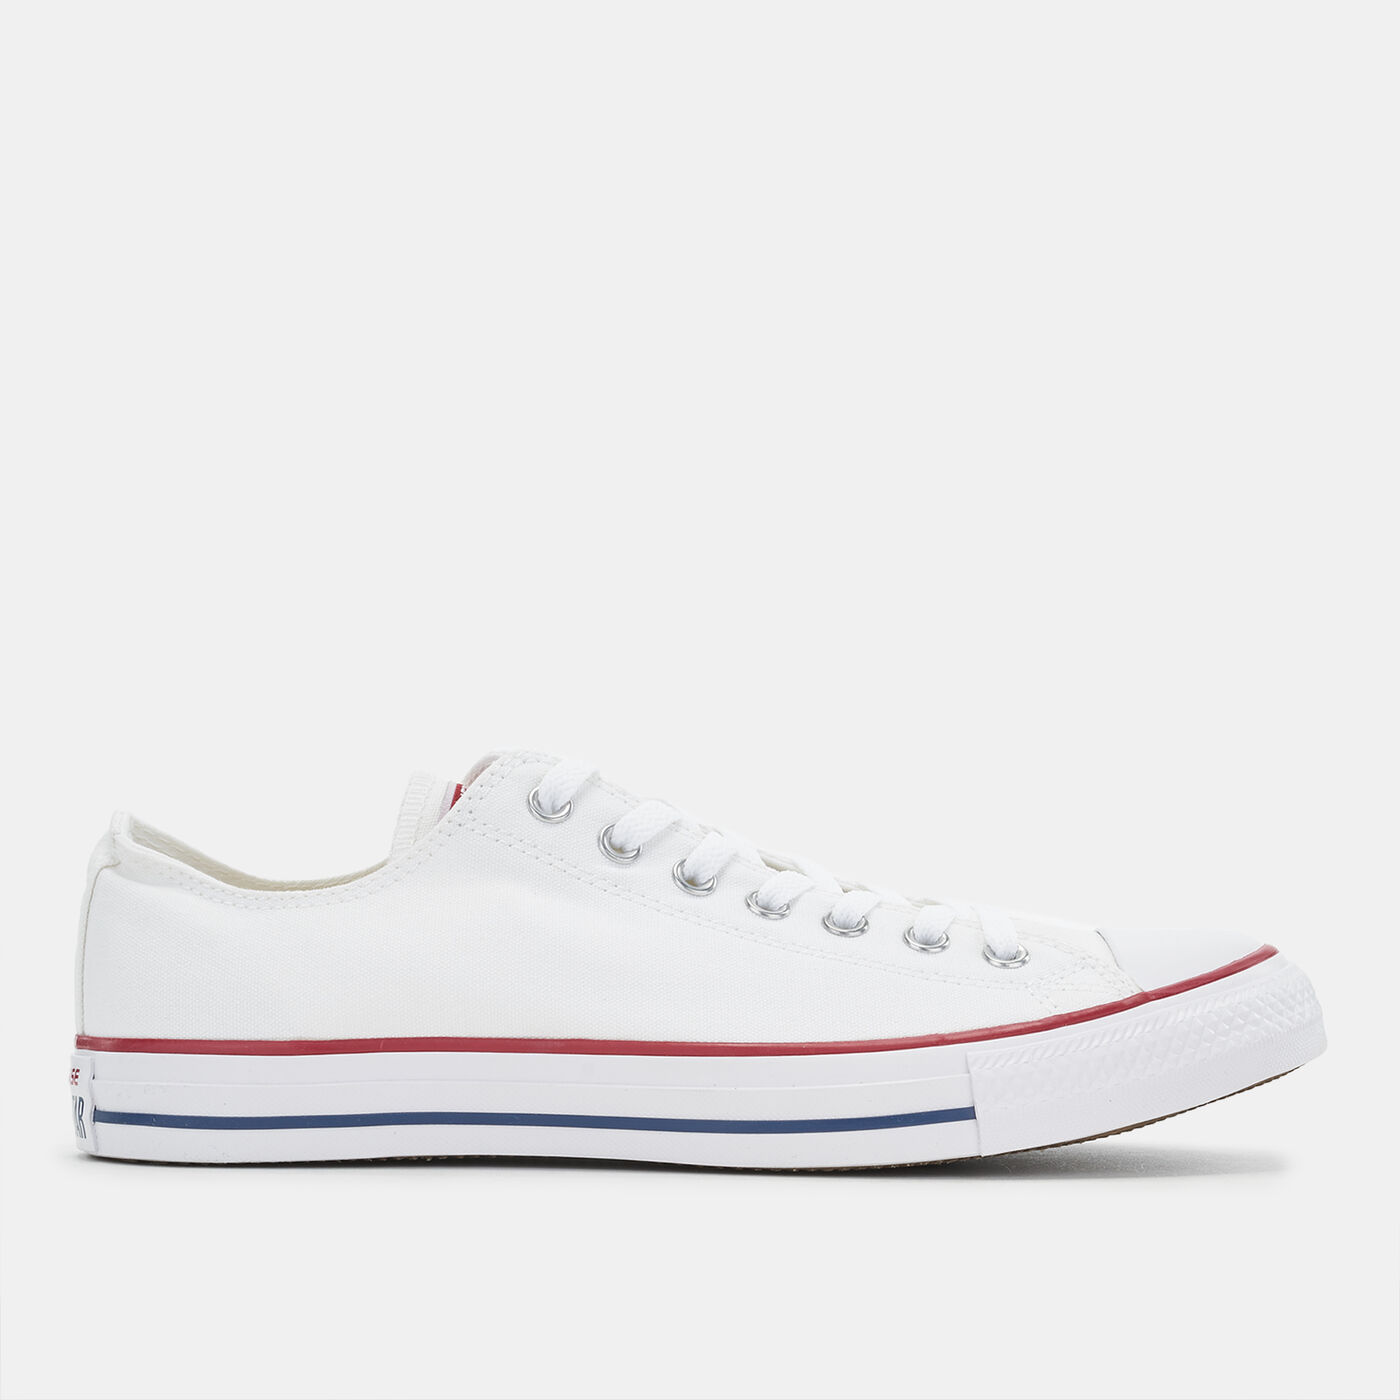 Chuck Taylor All Star Core Oxford Unisex Shoe